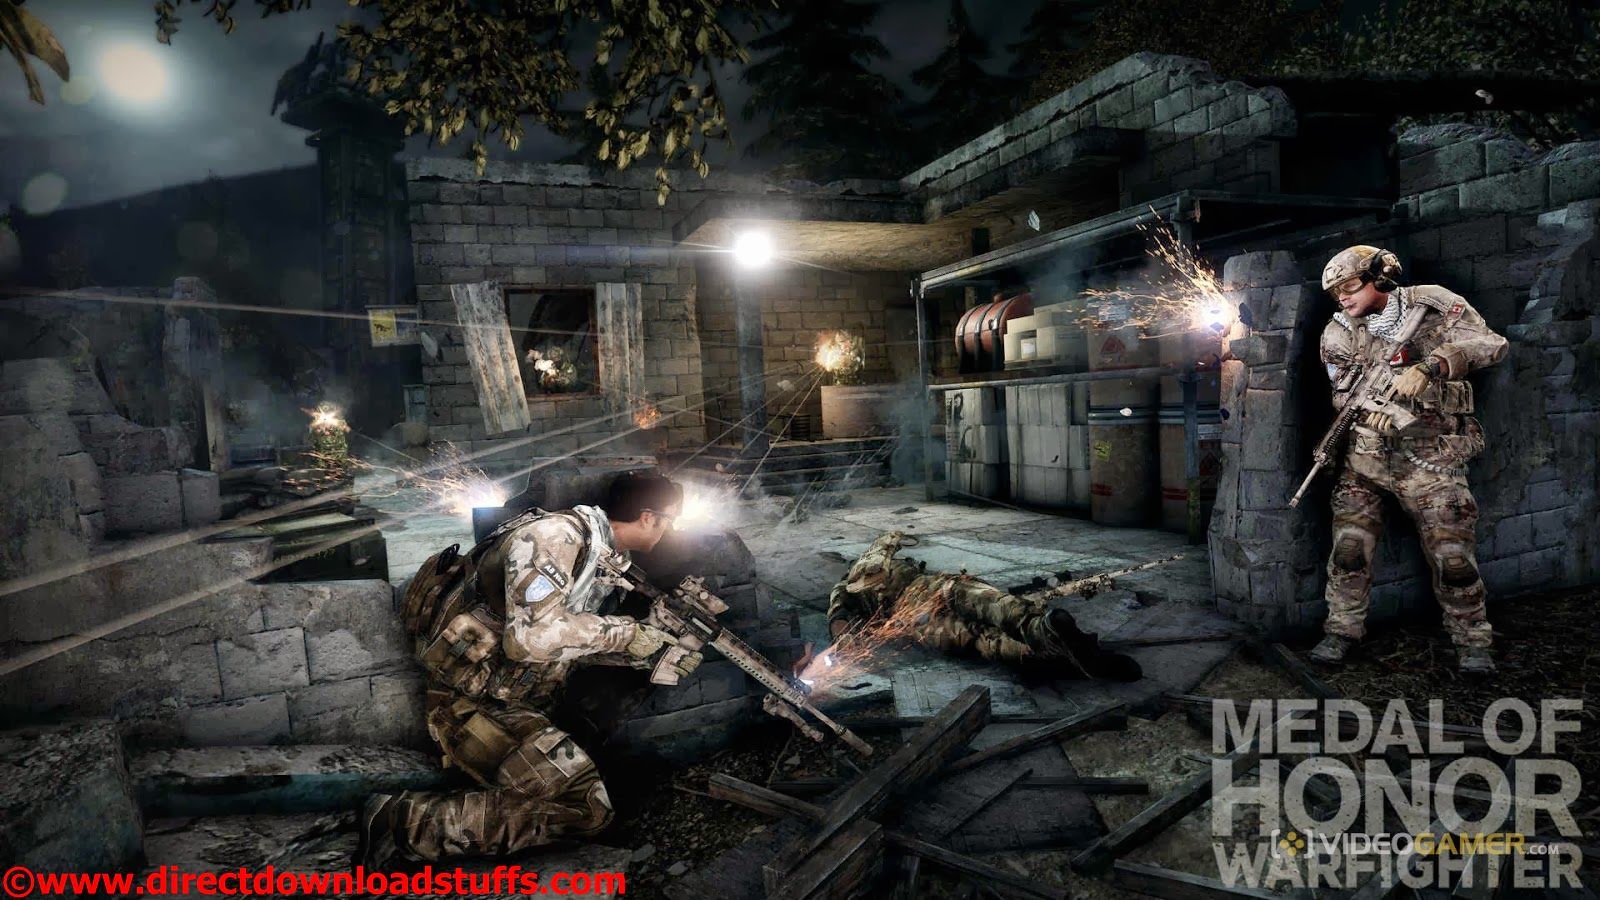 Medal Of Honor Warfighter PC Game Direct Download Links